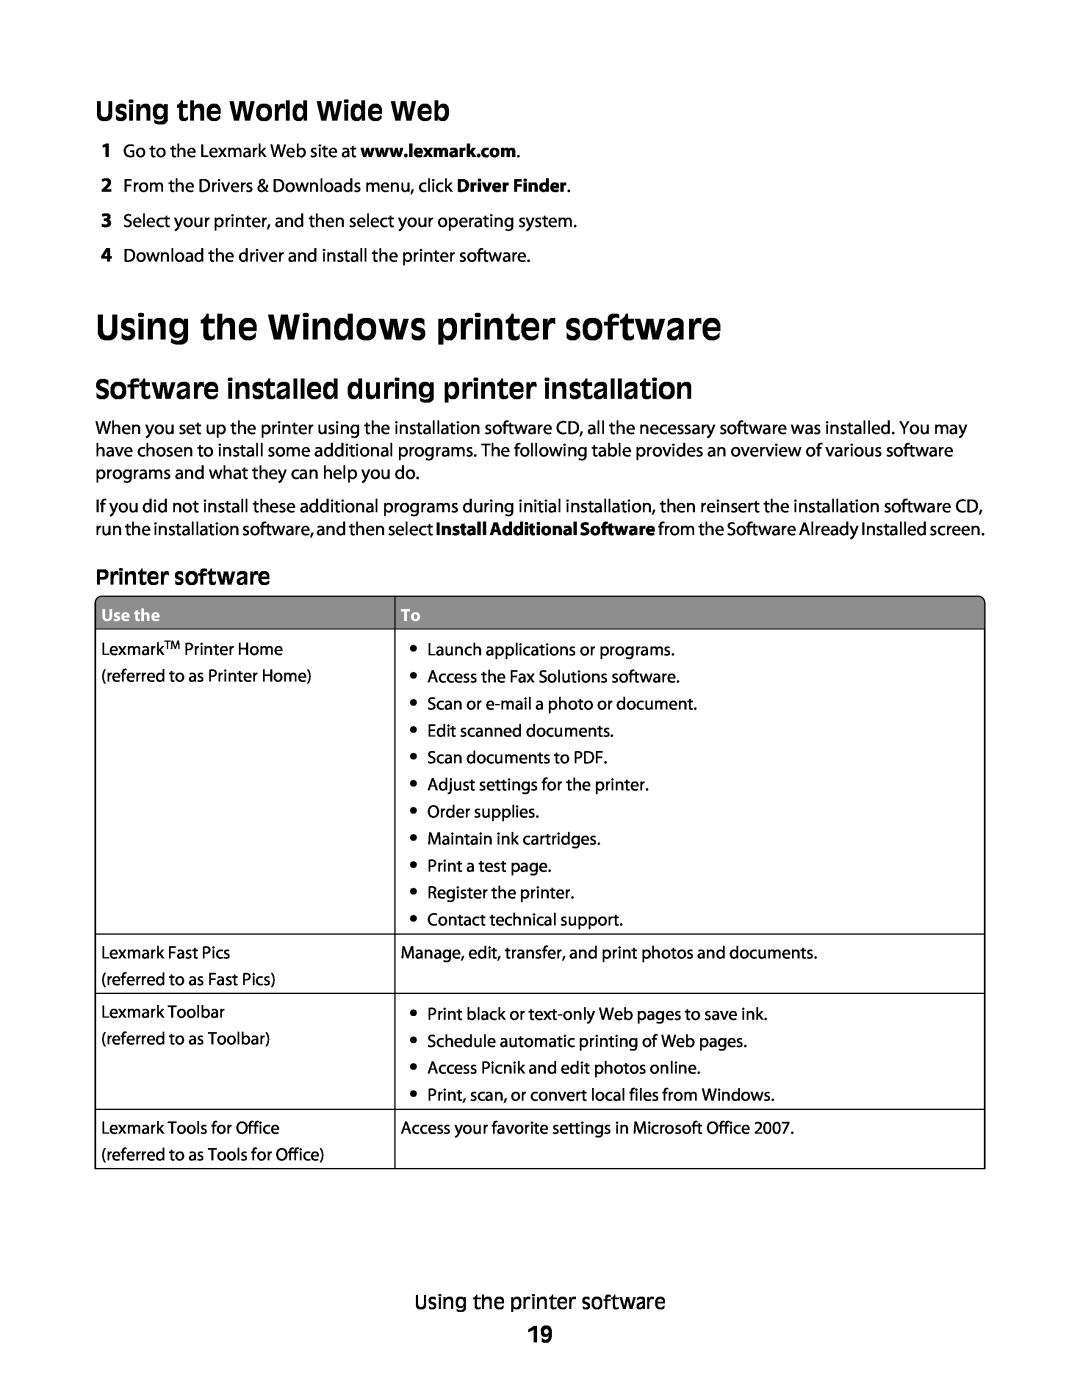 Lexmark S300 Using the Windows printer software, Using the World Wide Web, Software installed during printer installation 